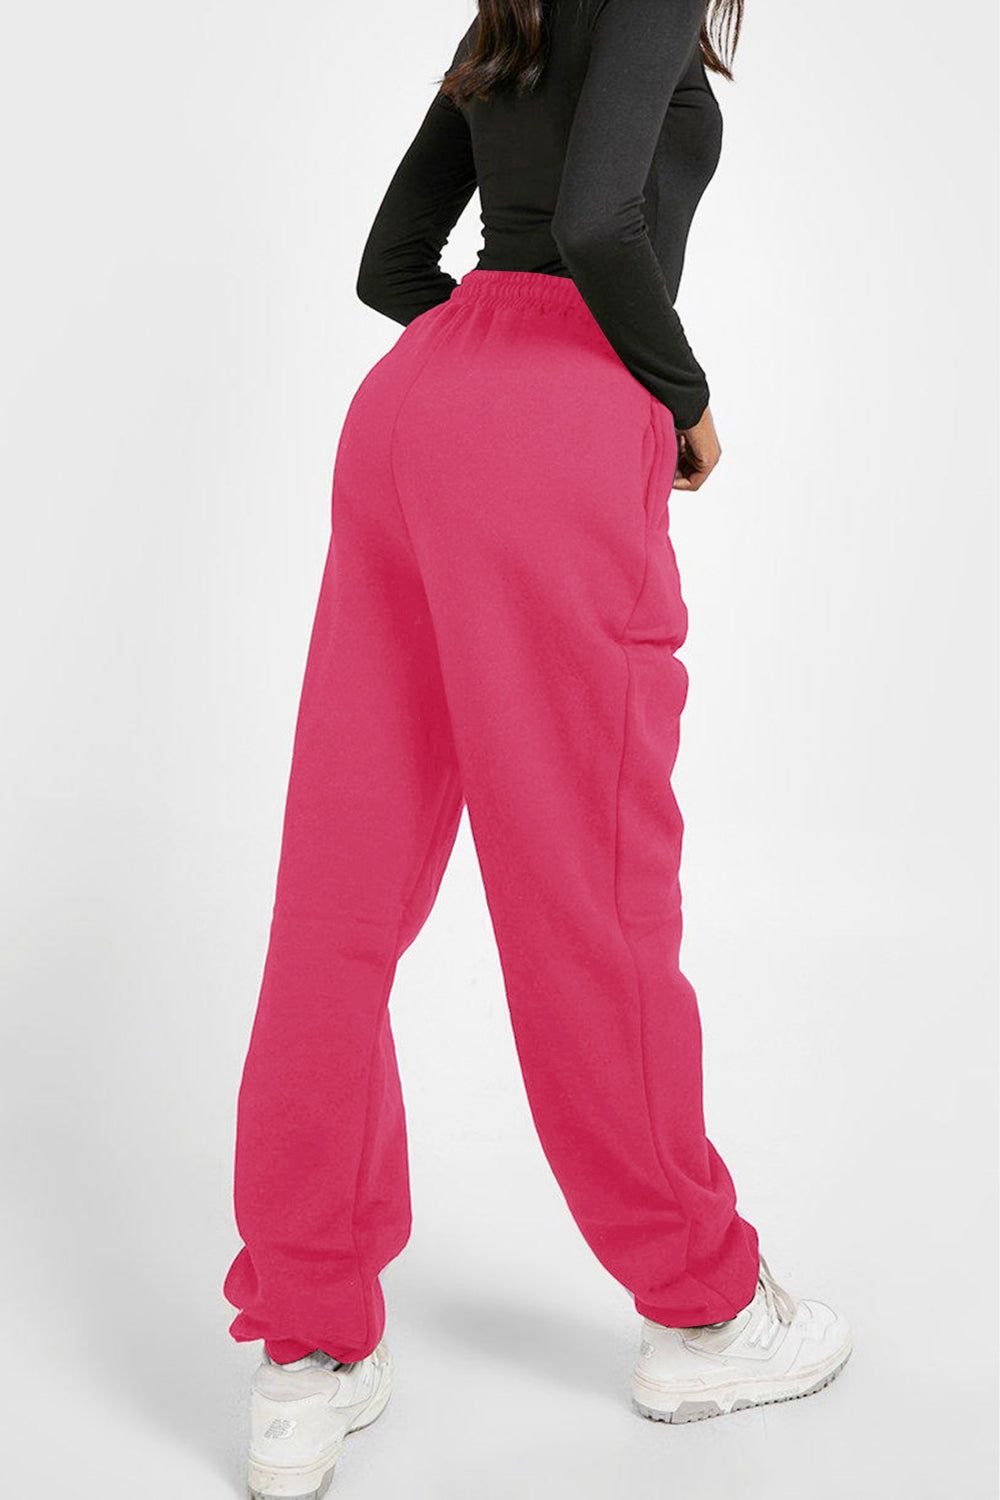 Women Simply Love Full Size Drawstring DAY YOU DESERVE Graphic Sweatpants